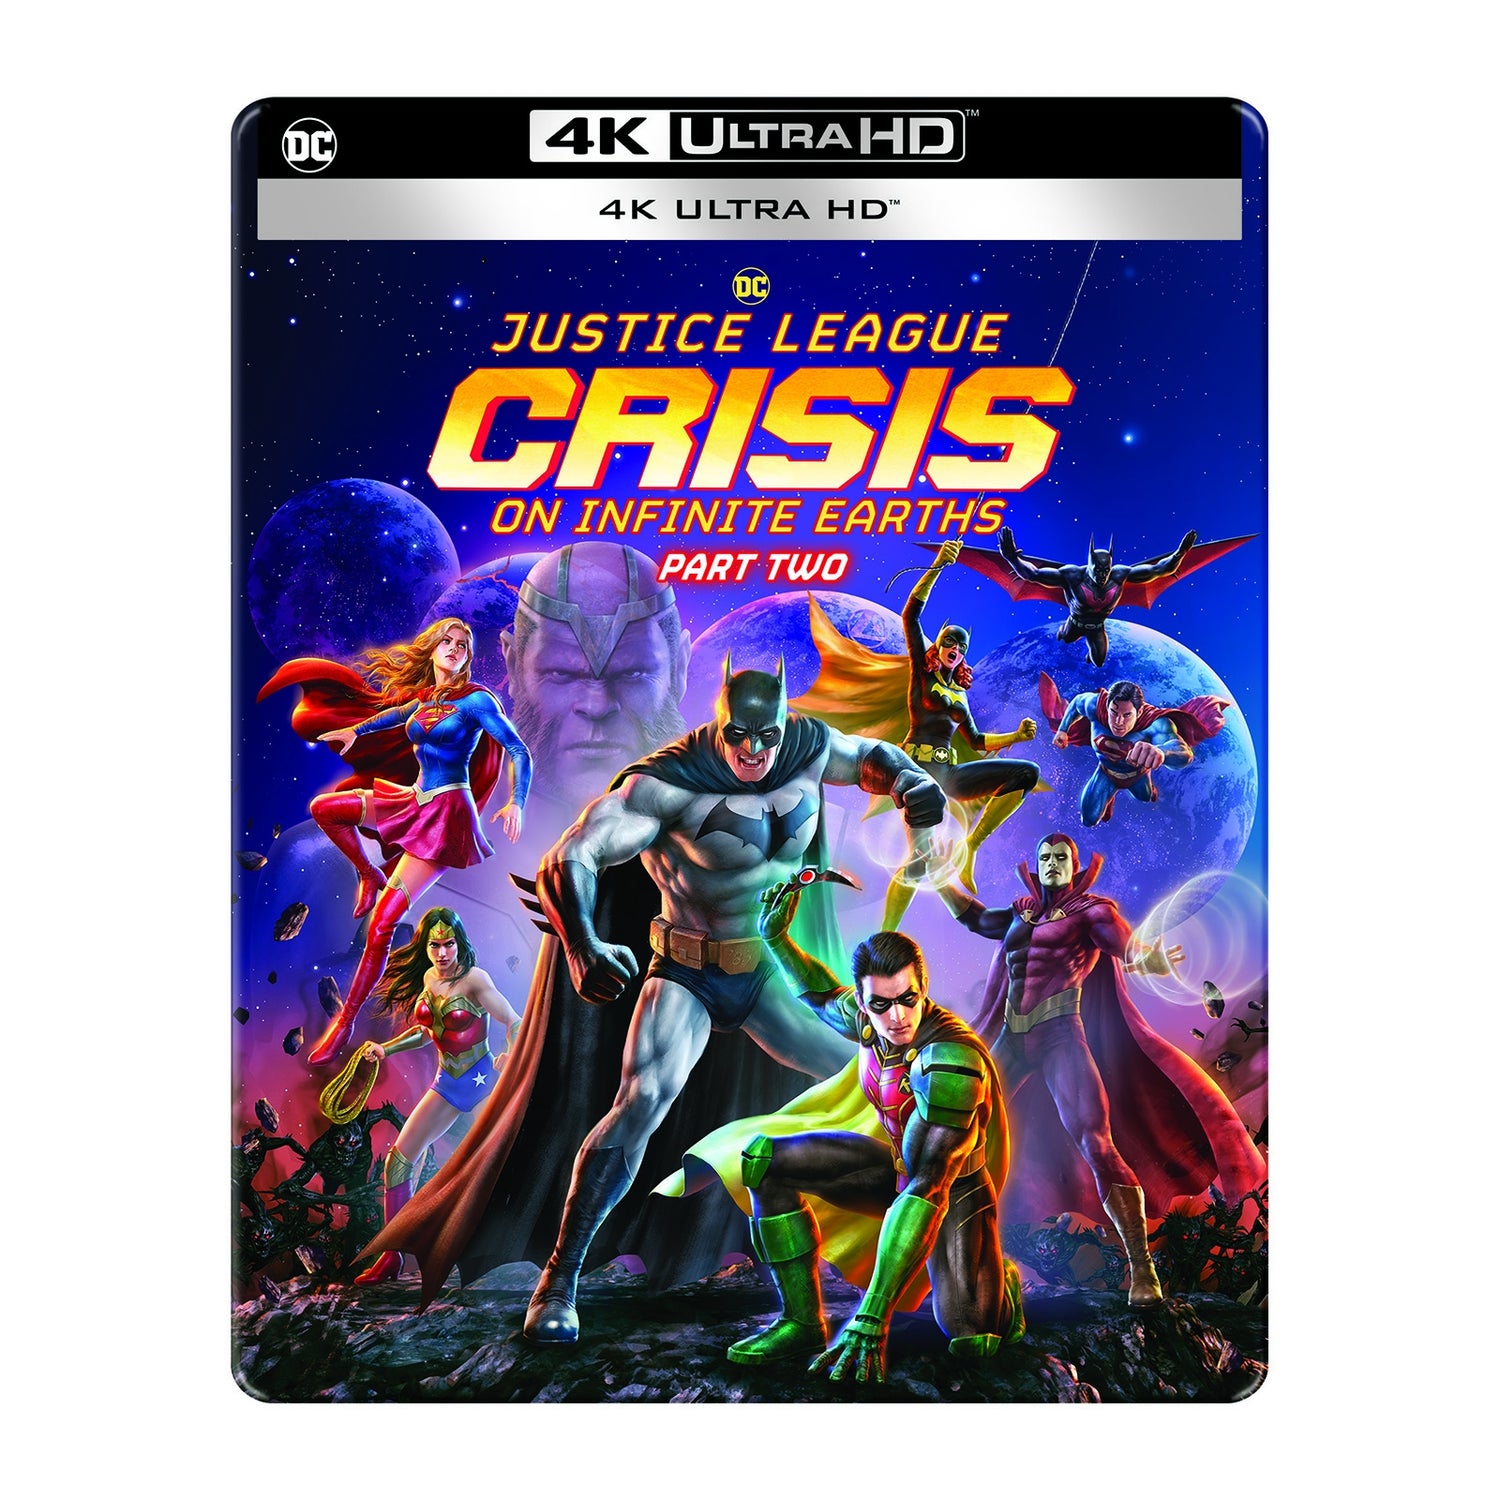 Justice League: Crisis on Infinite Earths - Part 2 SteelBook 4K Ultra HD (Includes Blu-ray)